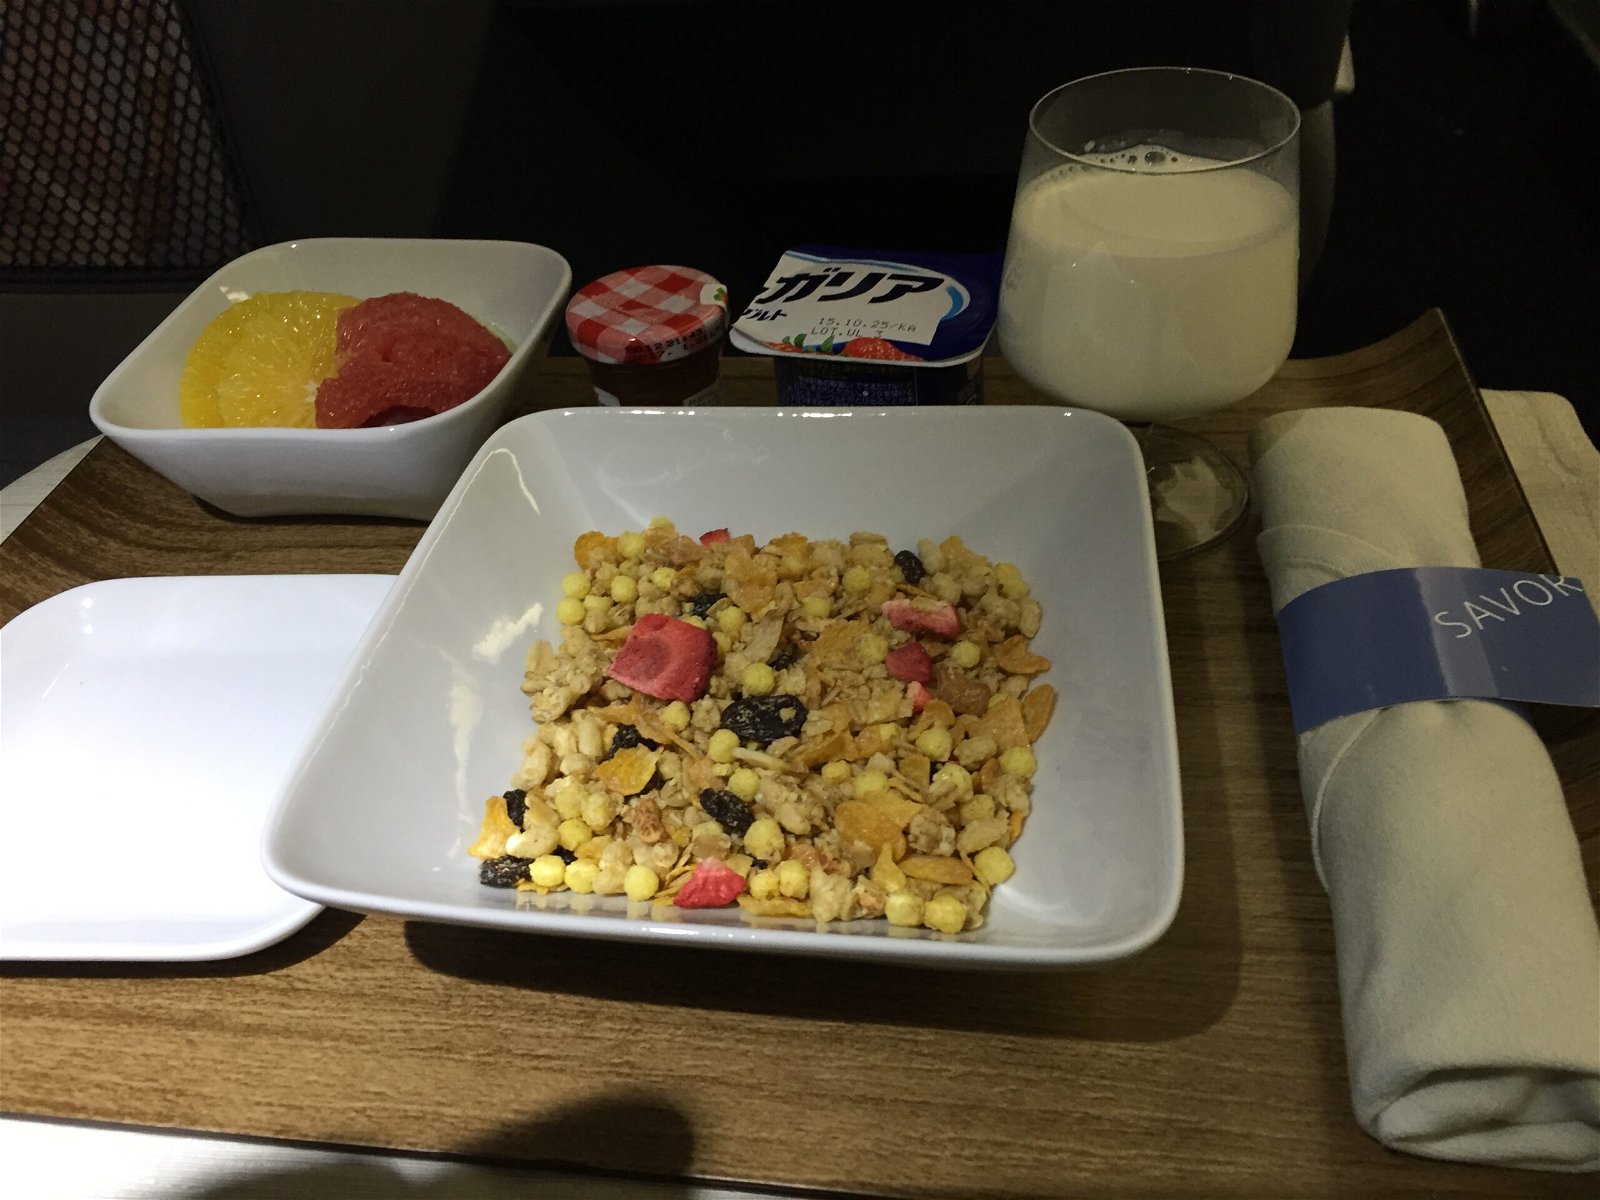 Delta One "Almost There" cereal